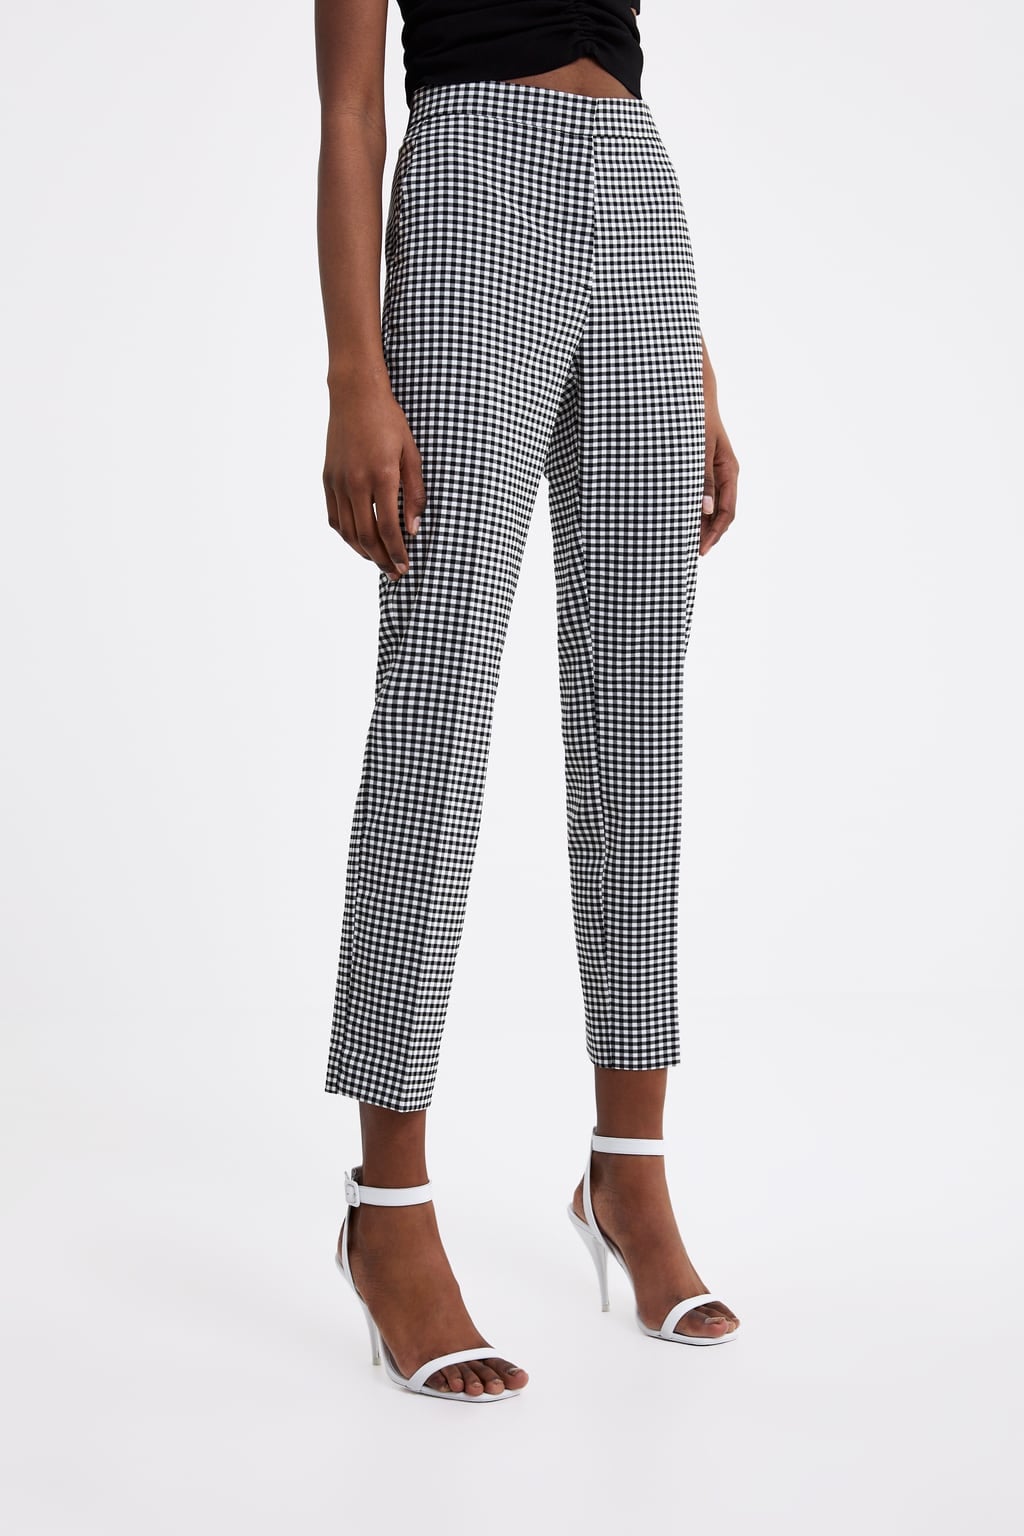 Zara Gingham Jogging Pants  Master Gingham Print With 14 Easy Outfits   POPSUGAR Fashion Photo 20